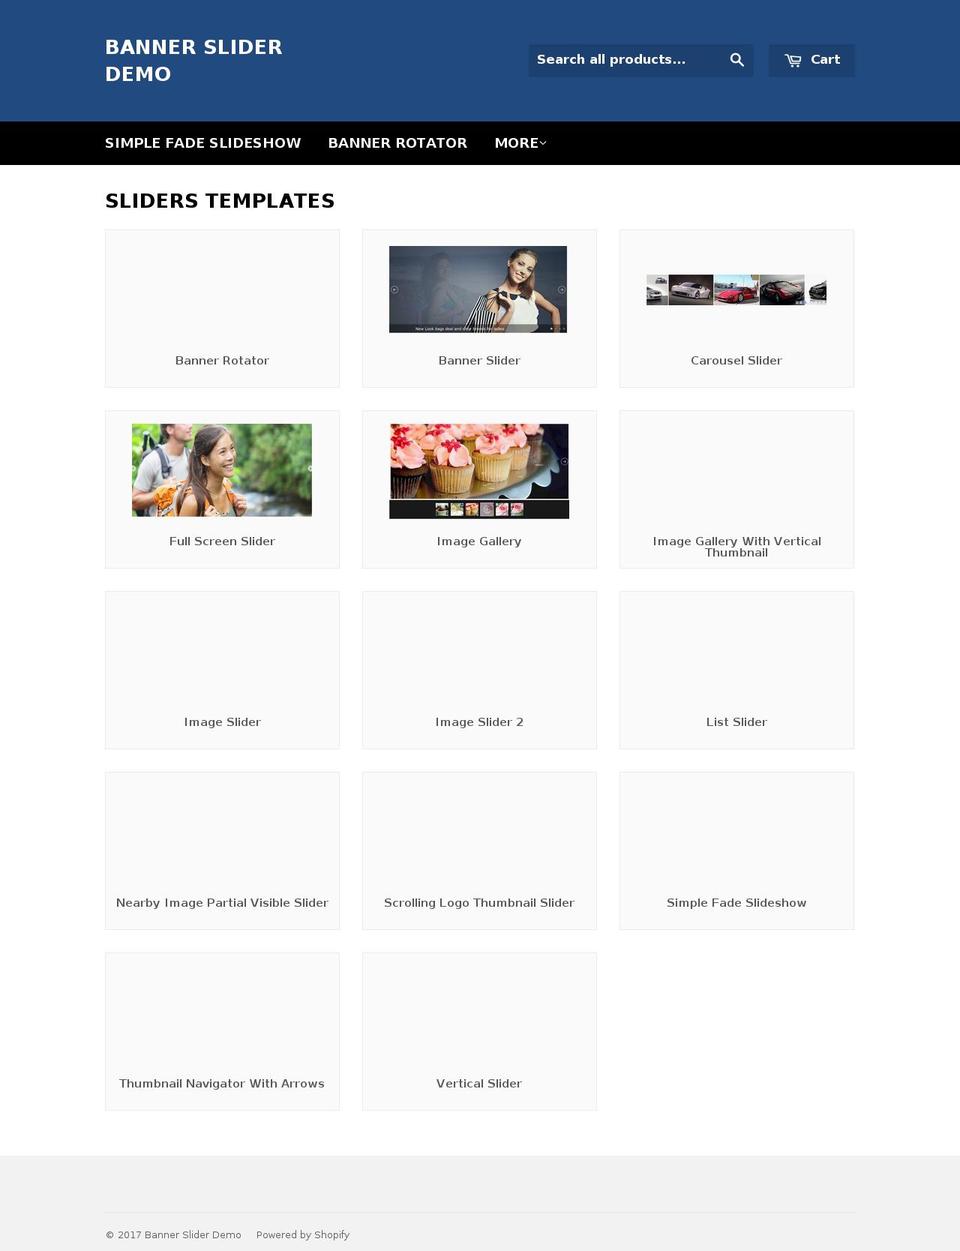 Supply Shopify theme site example bannerslider3.myshopify.com